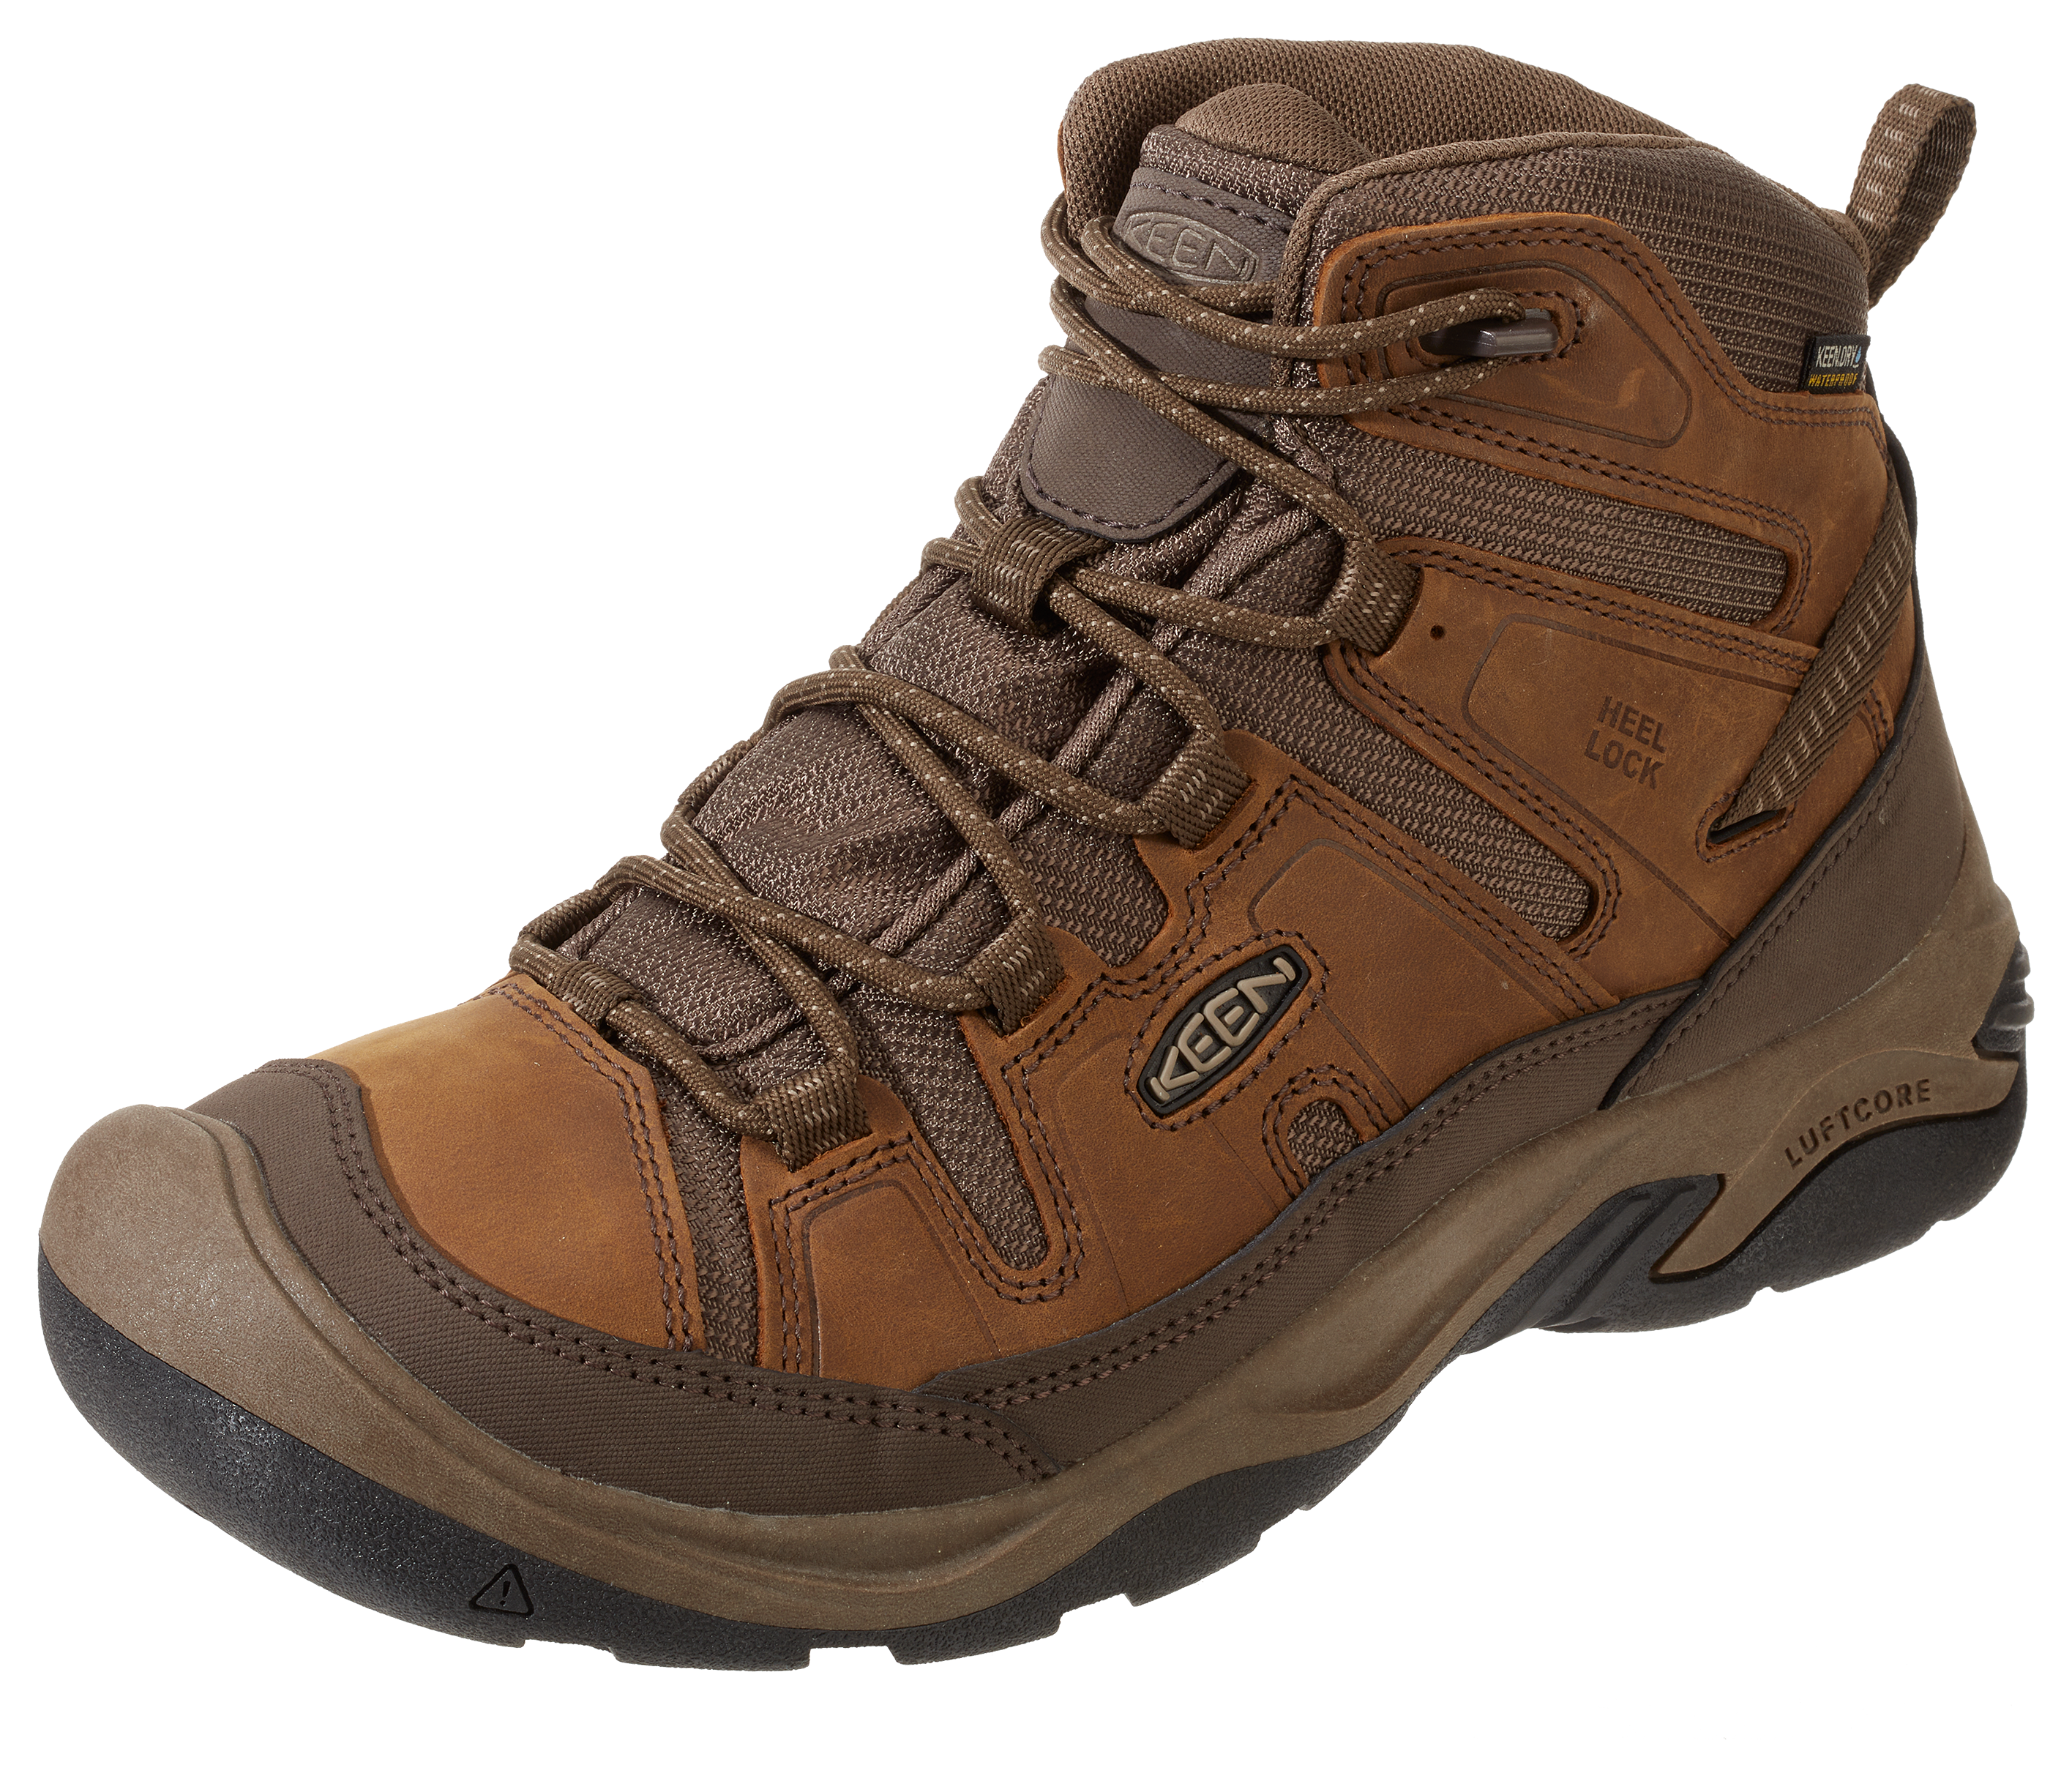 KEEN Circadia Mid WP Waterproof Hiking Boots for Men - Bison/Brindle - 11.5M